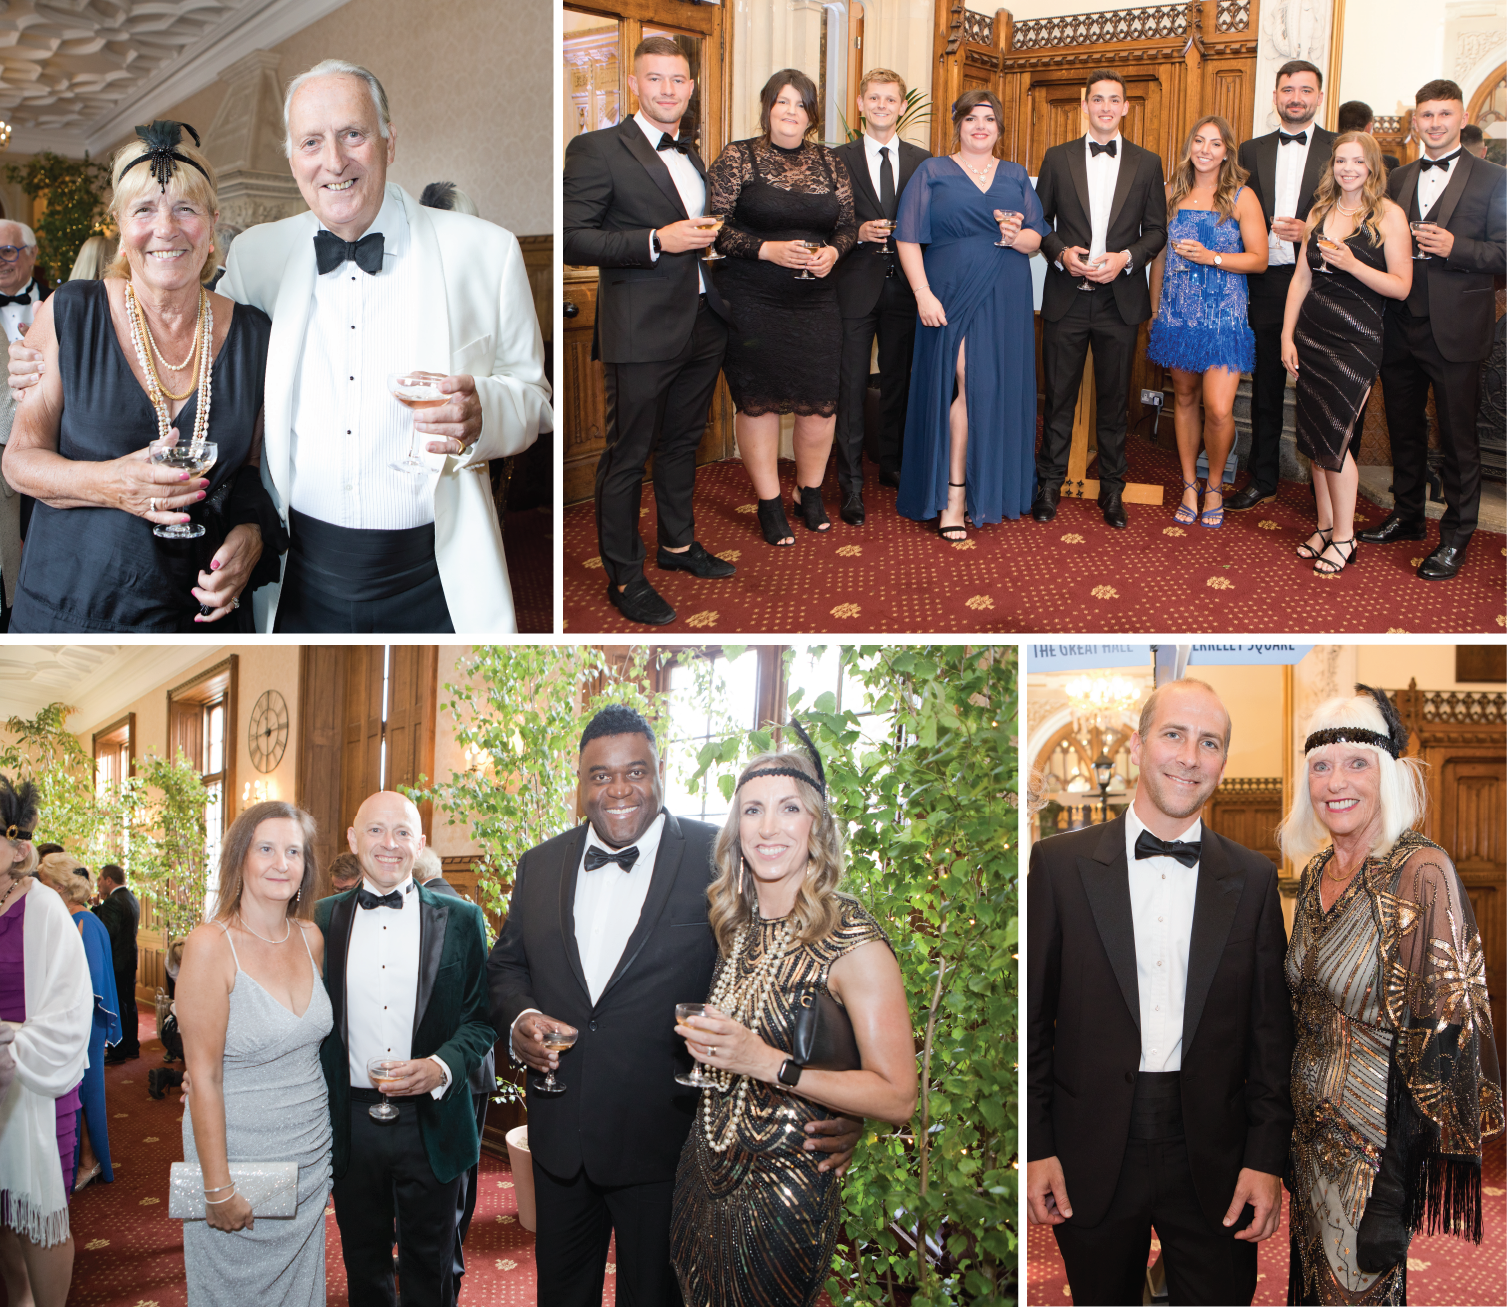 Lewis- Manning celebrates a magical evening of 1920’s glamour at their Nightingale Ball